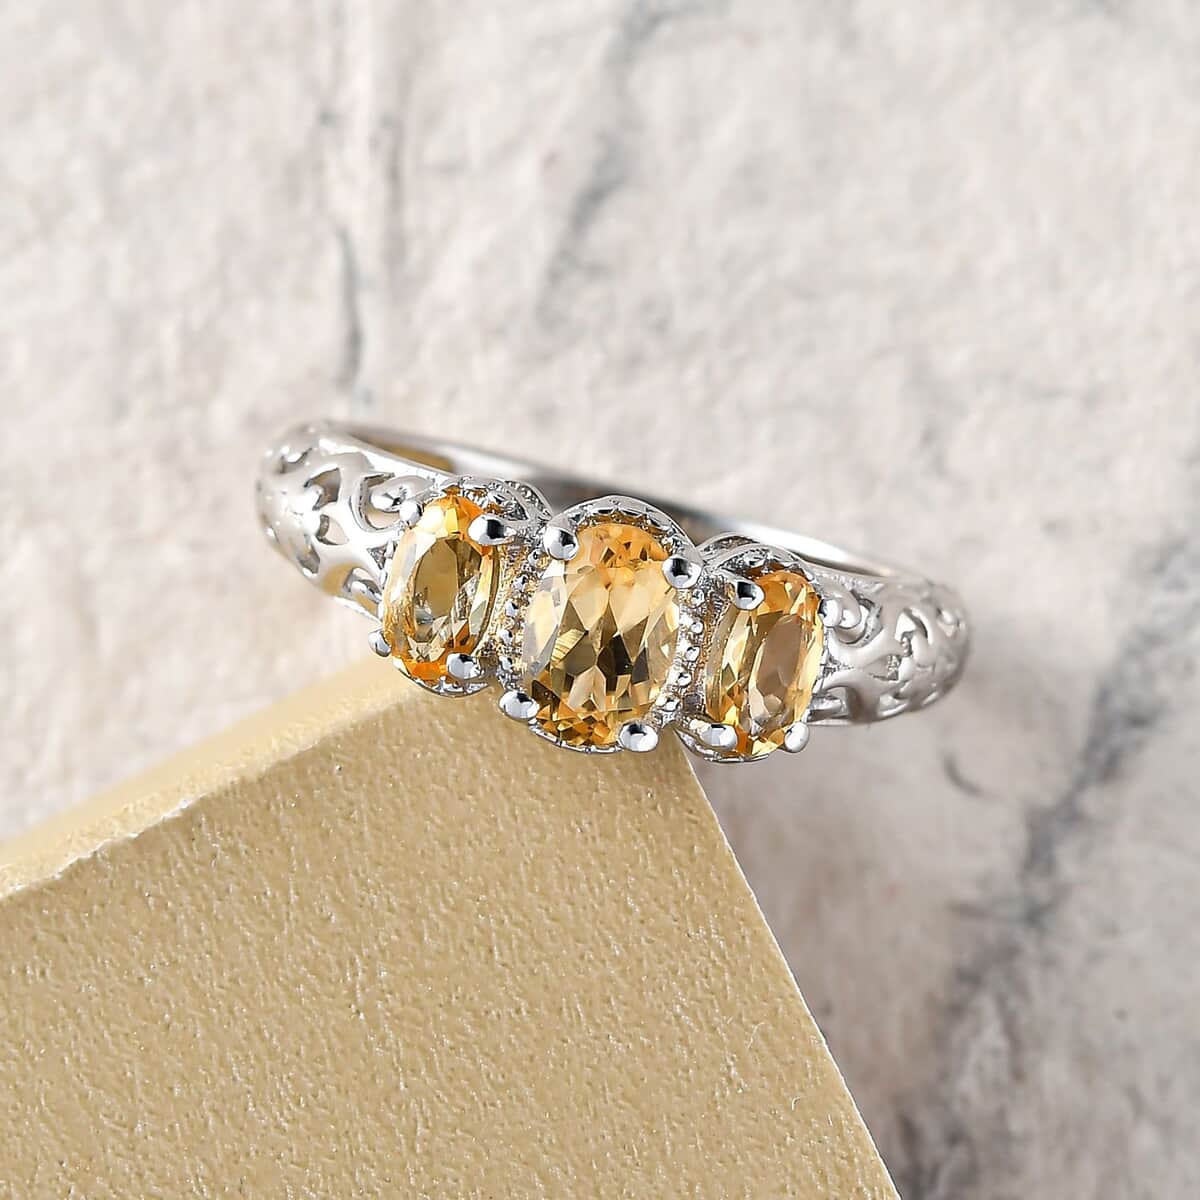 Citrine Ring, 3 Stone Citrine Ring, Trilogy Ring, Sterling Silver Ring, Birthstone Jewelry, Brazilian Citrine 3 Stone Ring 0.90 ctw (Size 10.0) image number 1